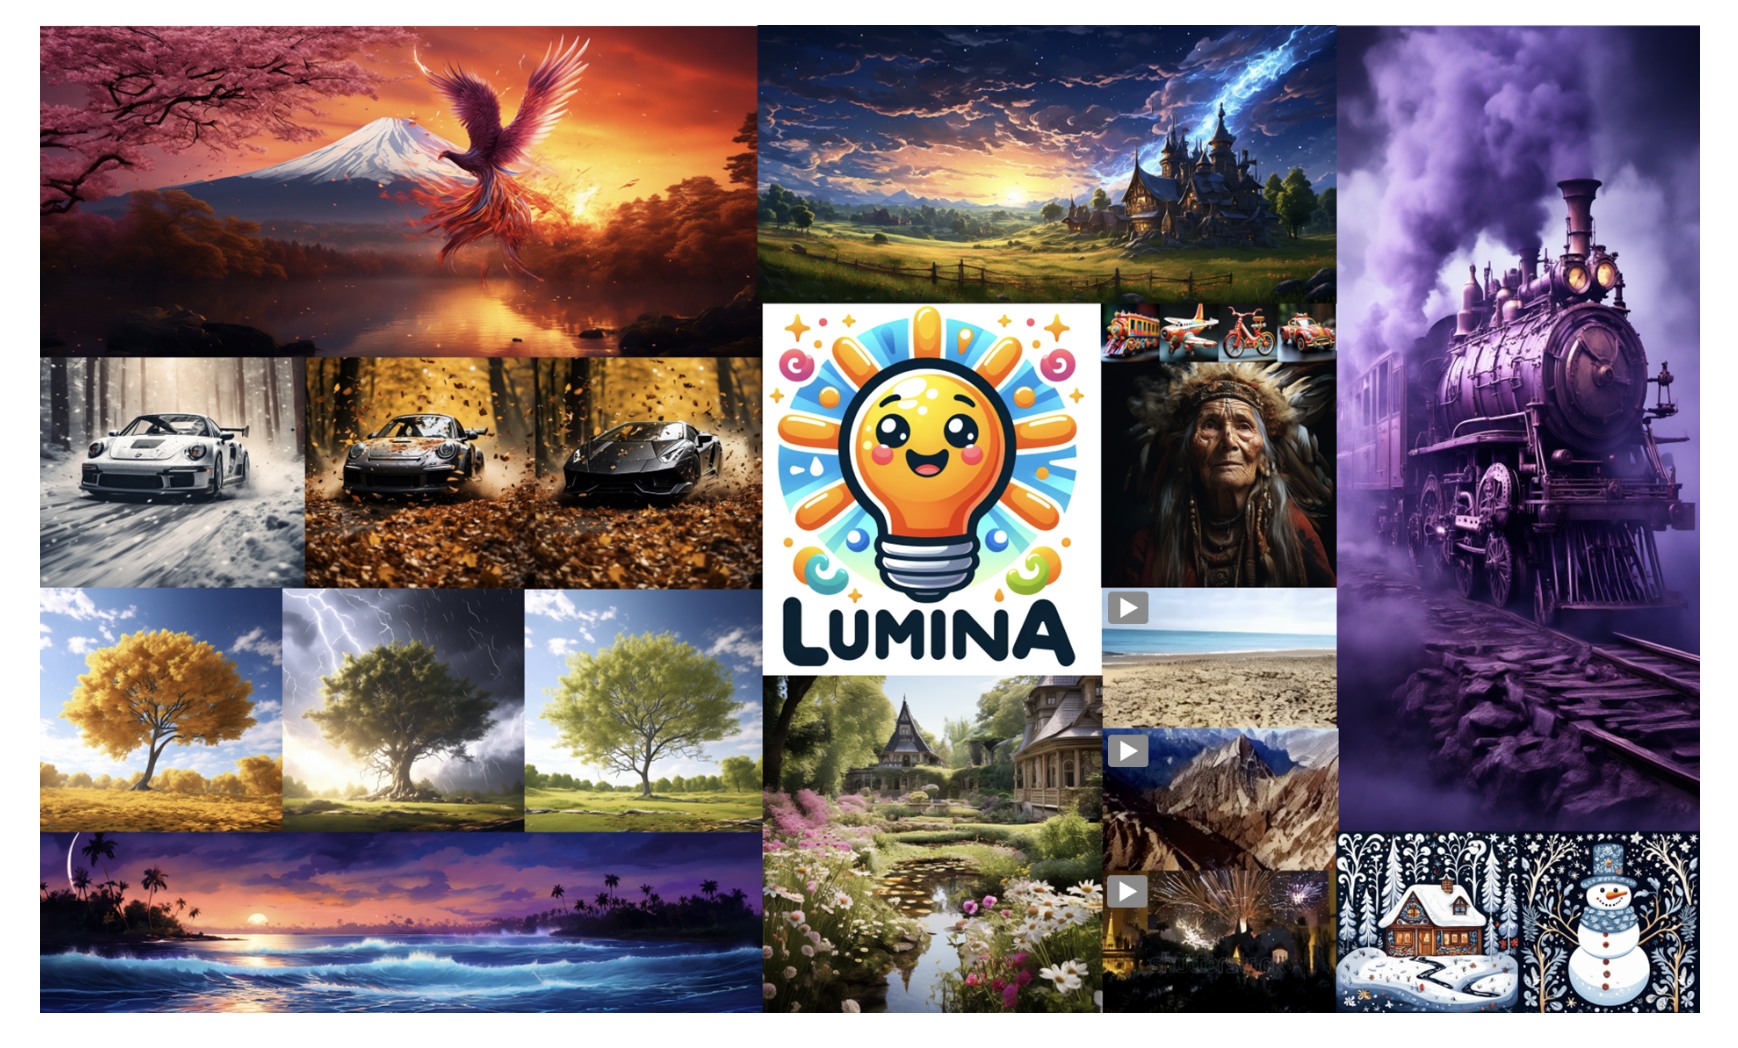  Lumina-T2X: A Unified AI Framework for Text to Any Modality Generation